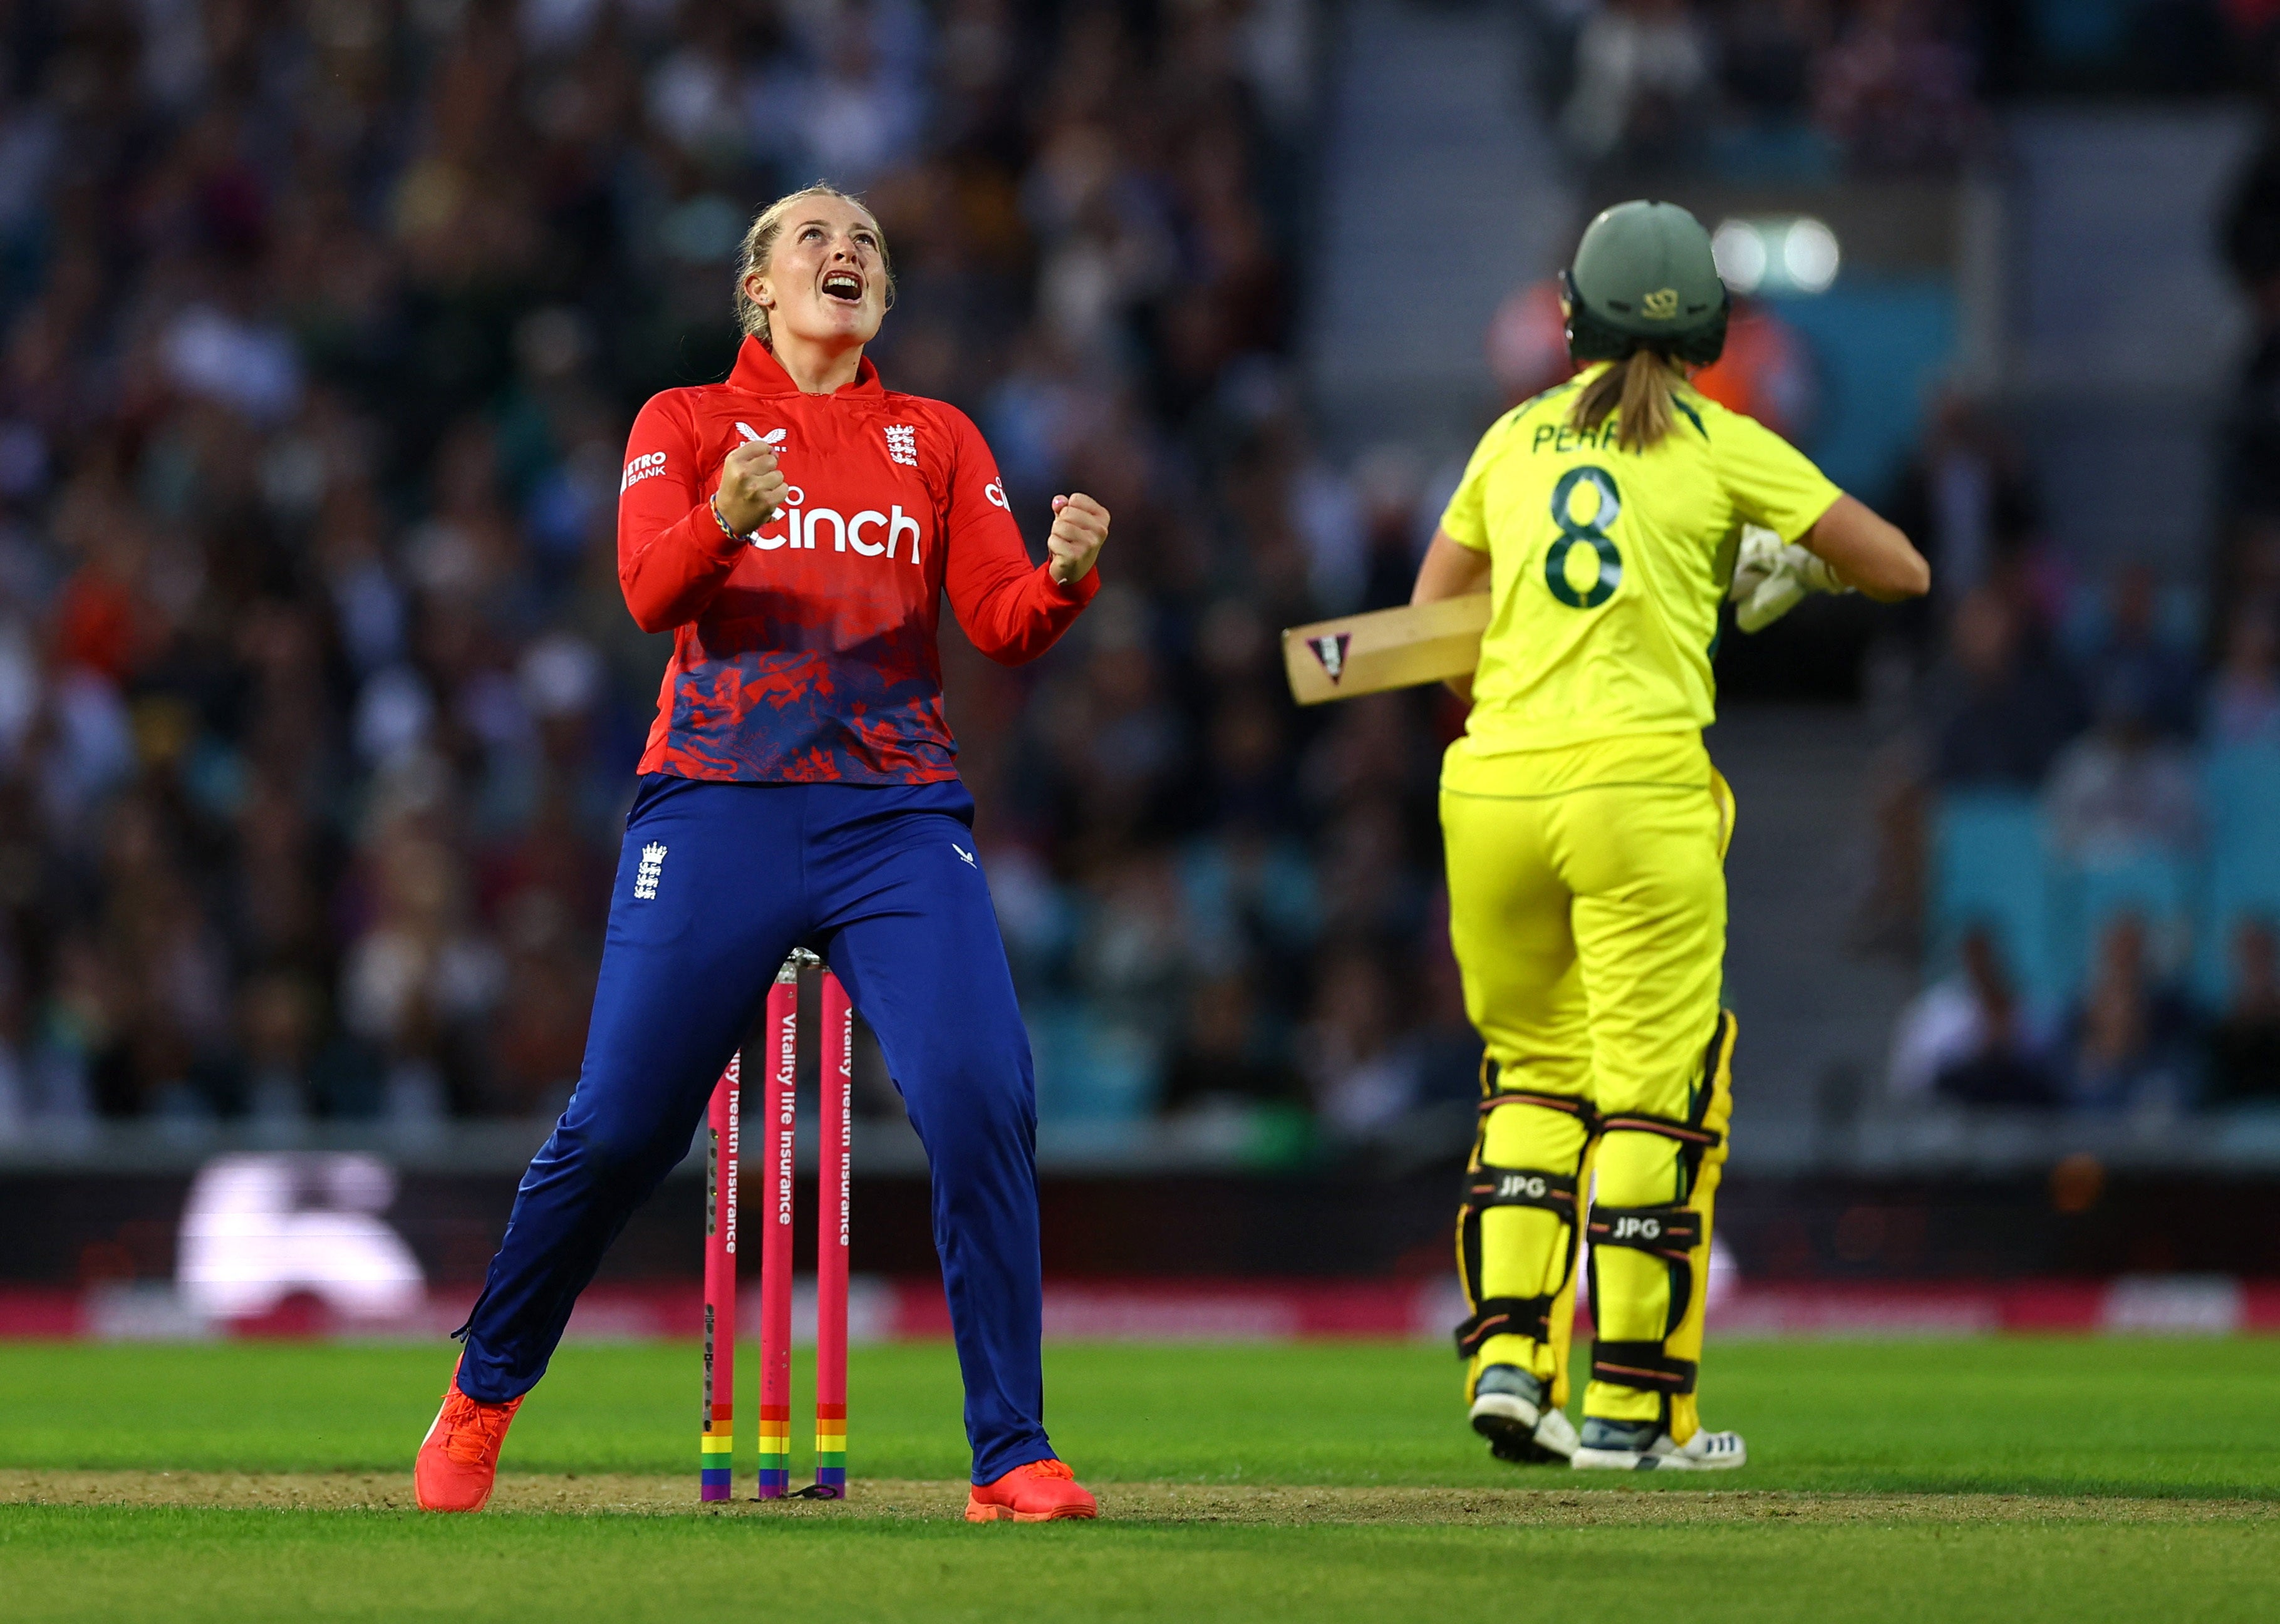 Sophie Ecclestone’s spinning skills are no less exciting than Moeen Ali’s, and were fully on display when England defeated Australia